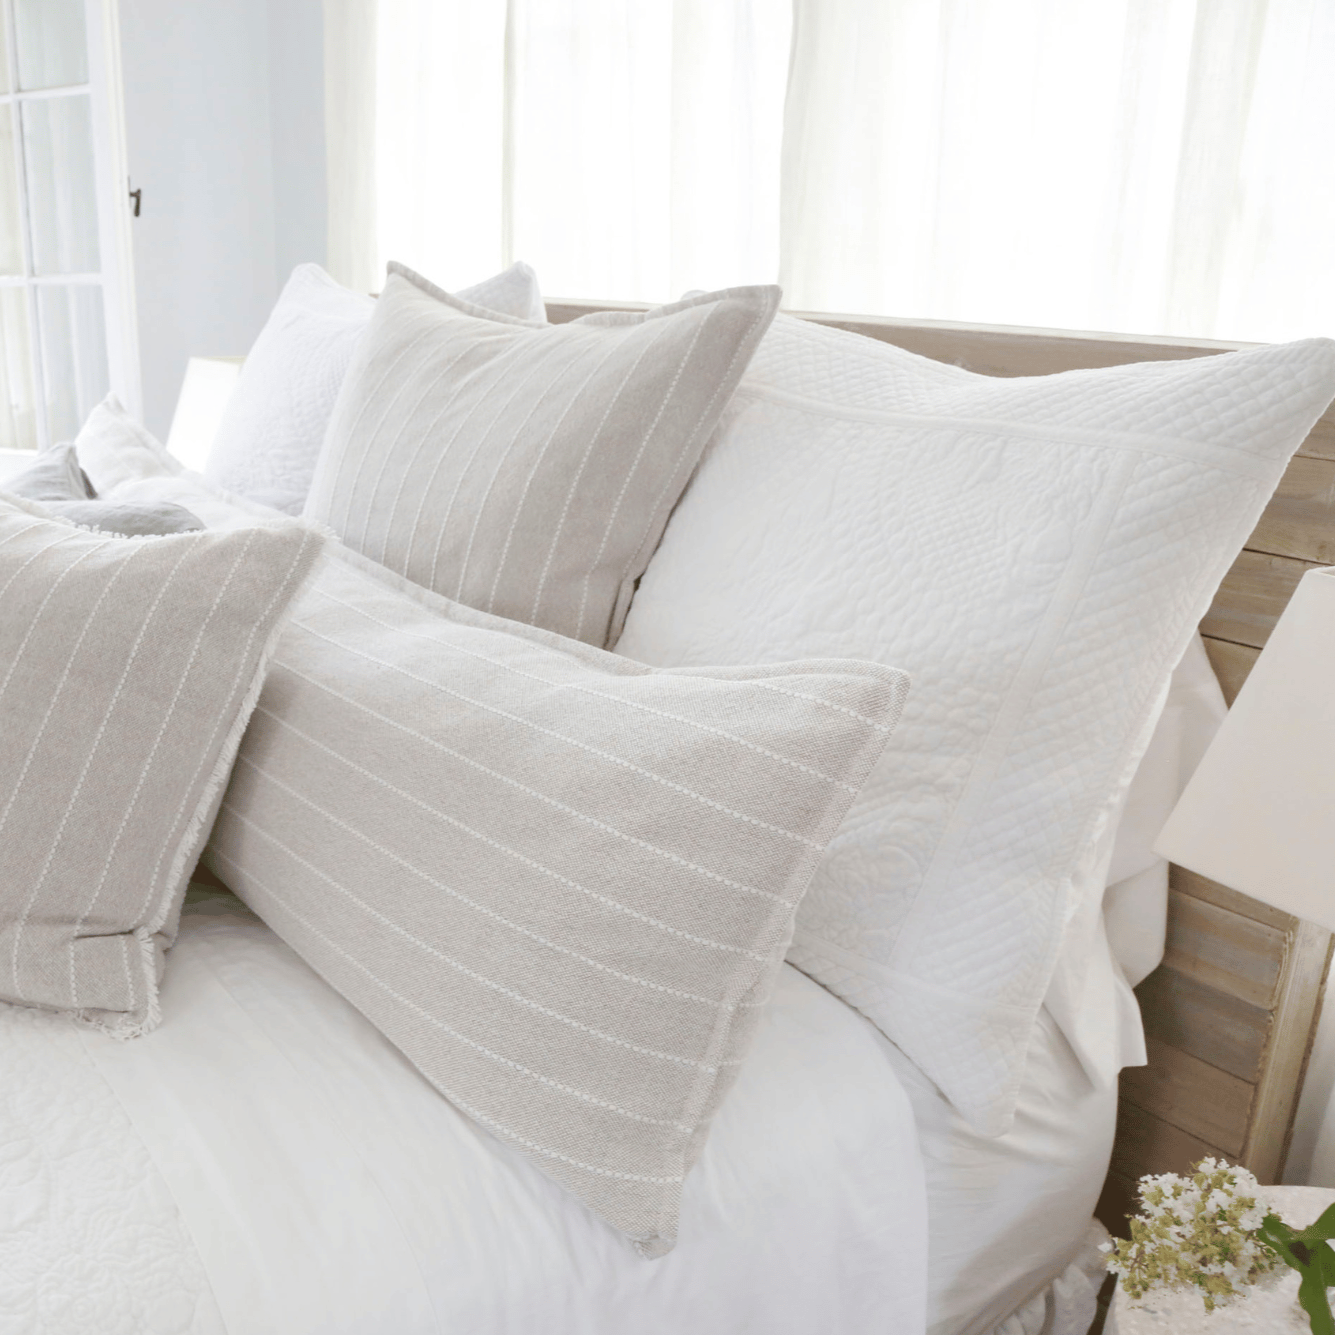 Henley Body Pillow by Pom Pom at Home